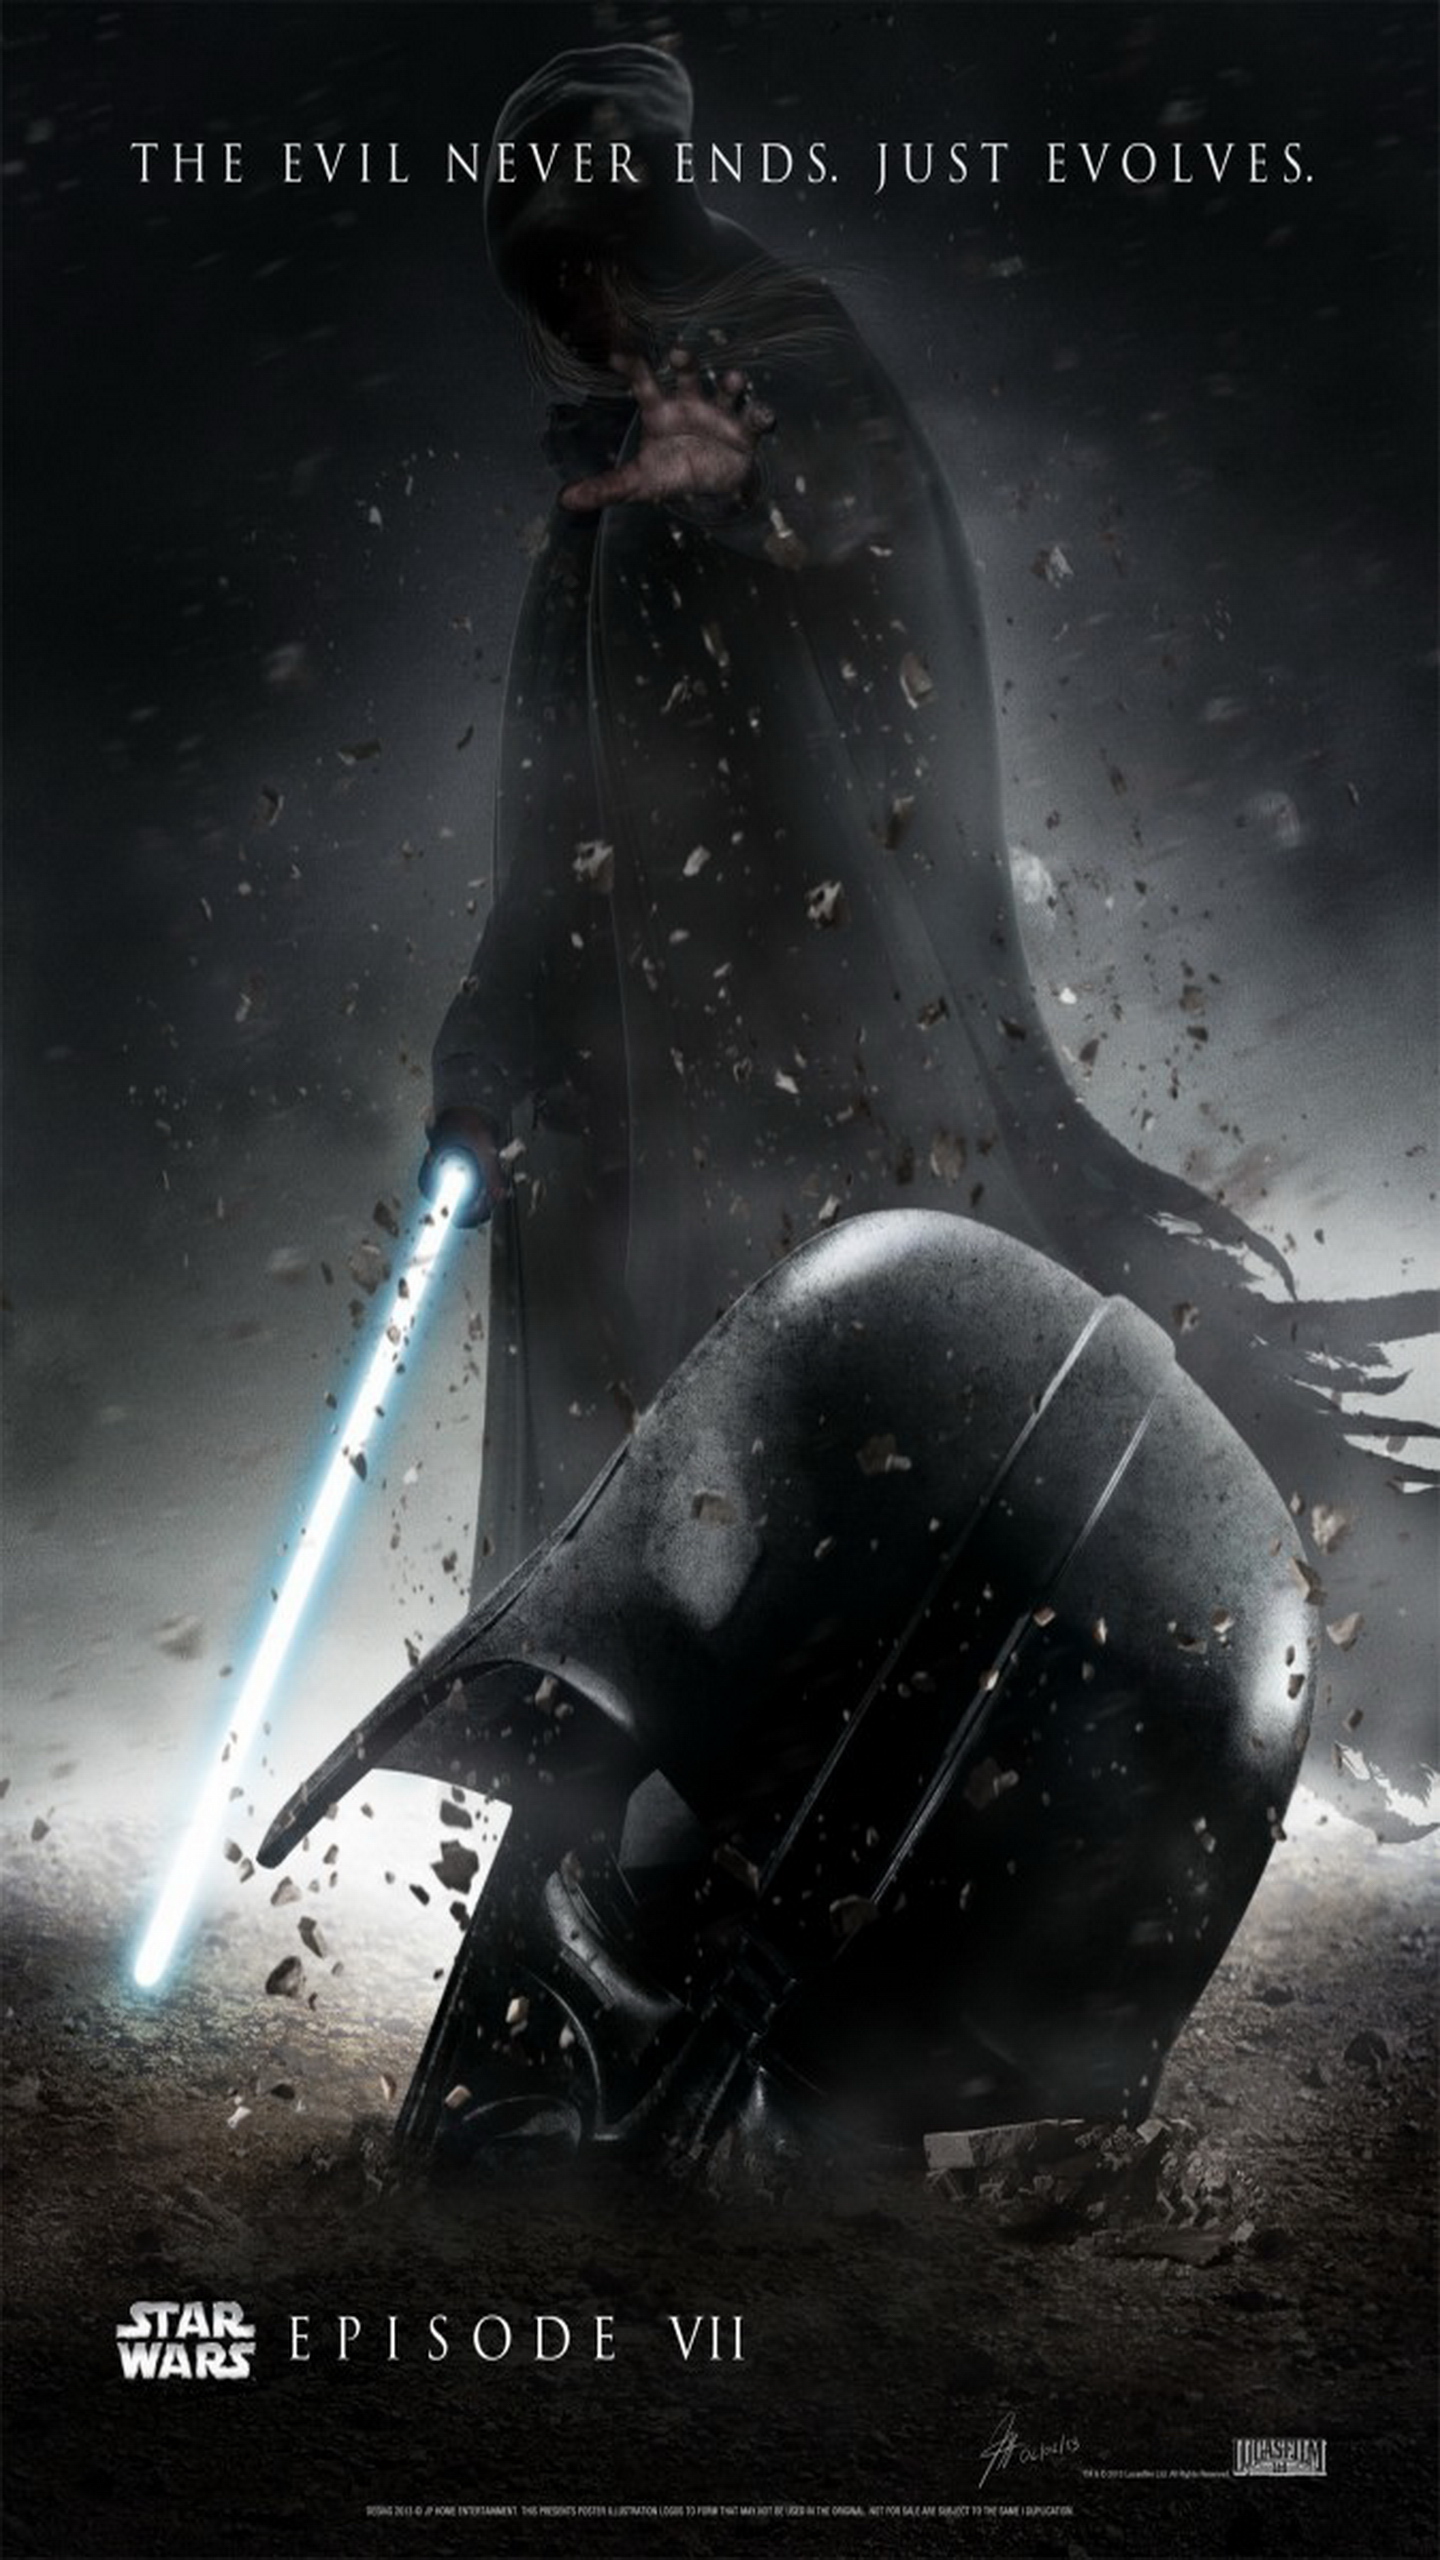  Episode VII The Force Awakens 2015 Poster Galaxy Note Wallpaper